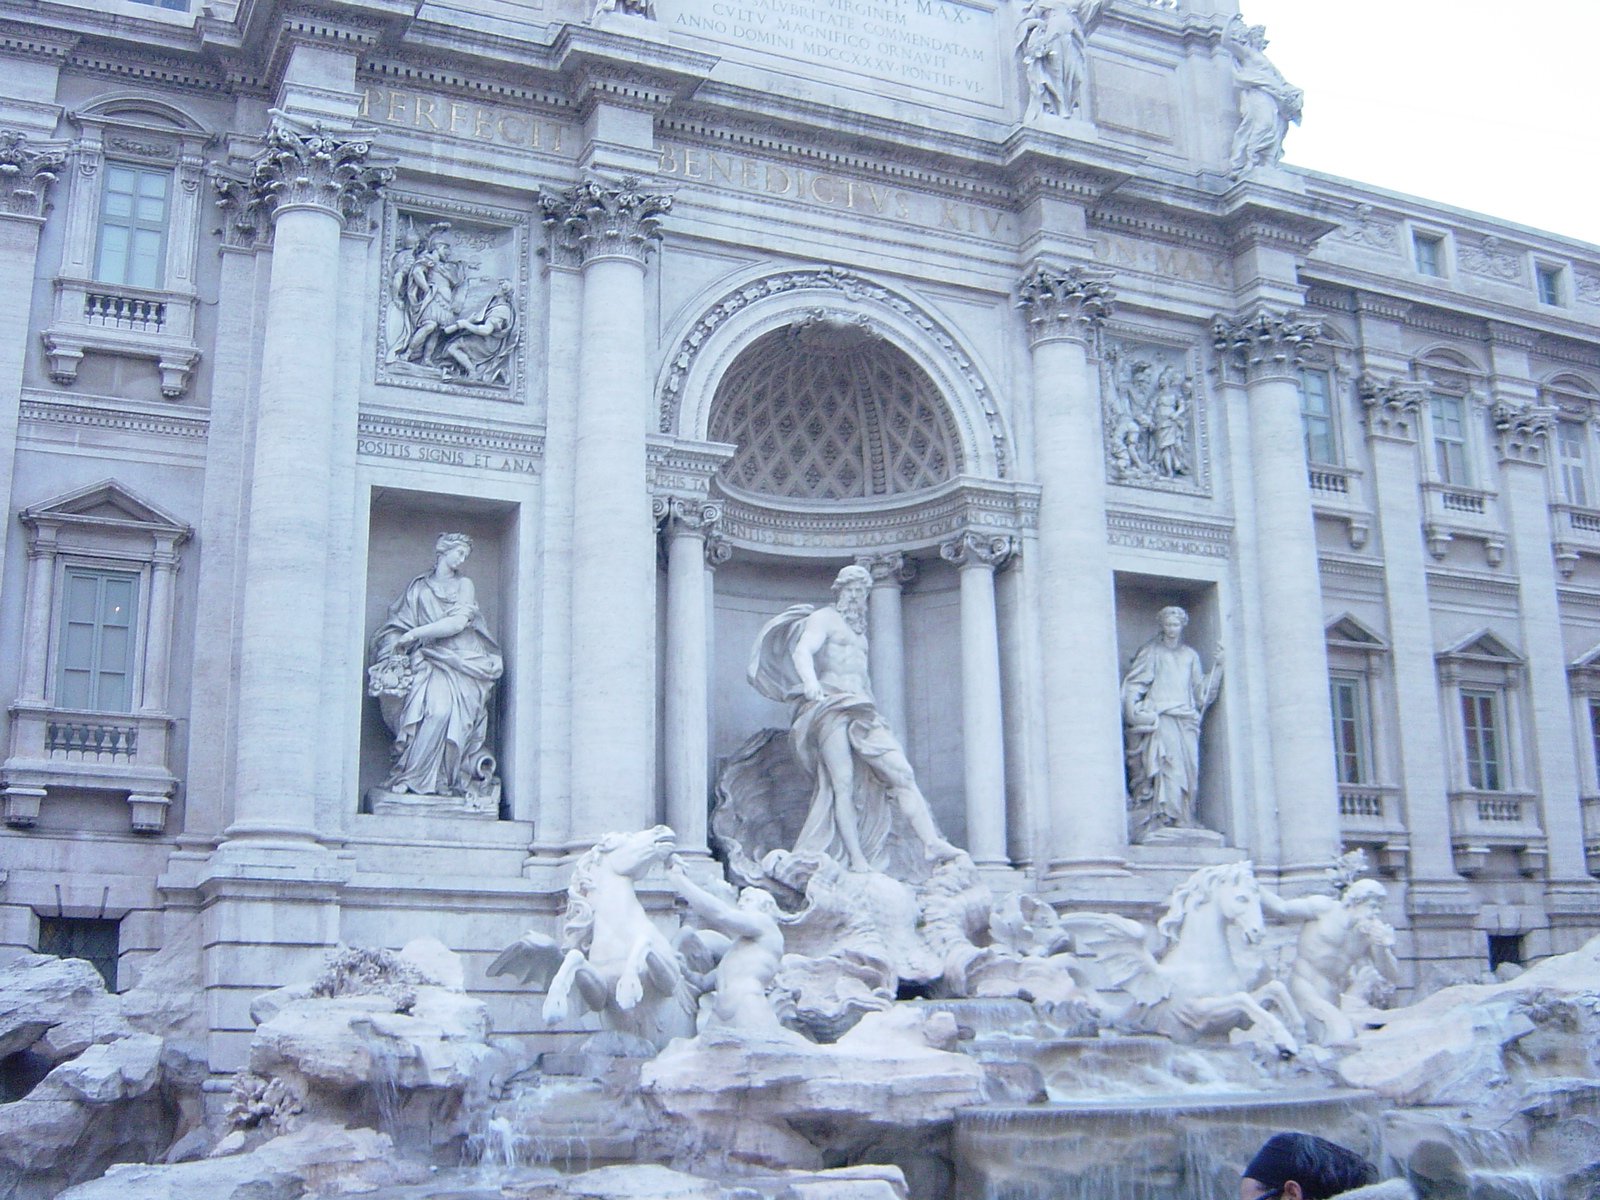 a large stone building with statues on the side